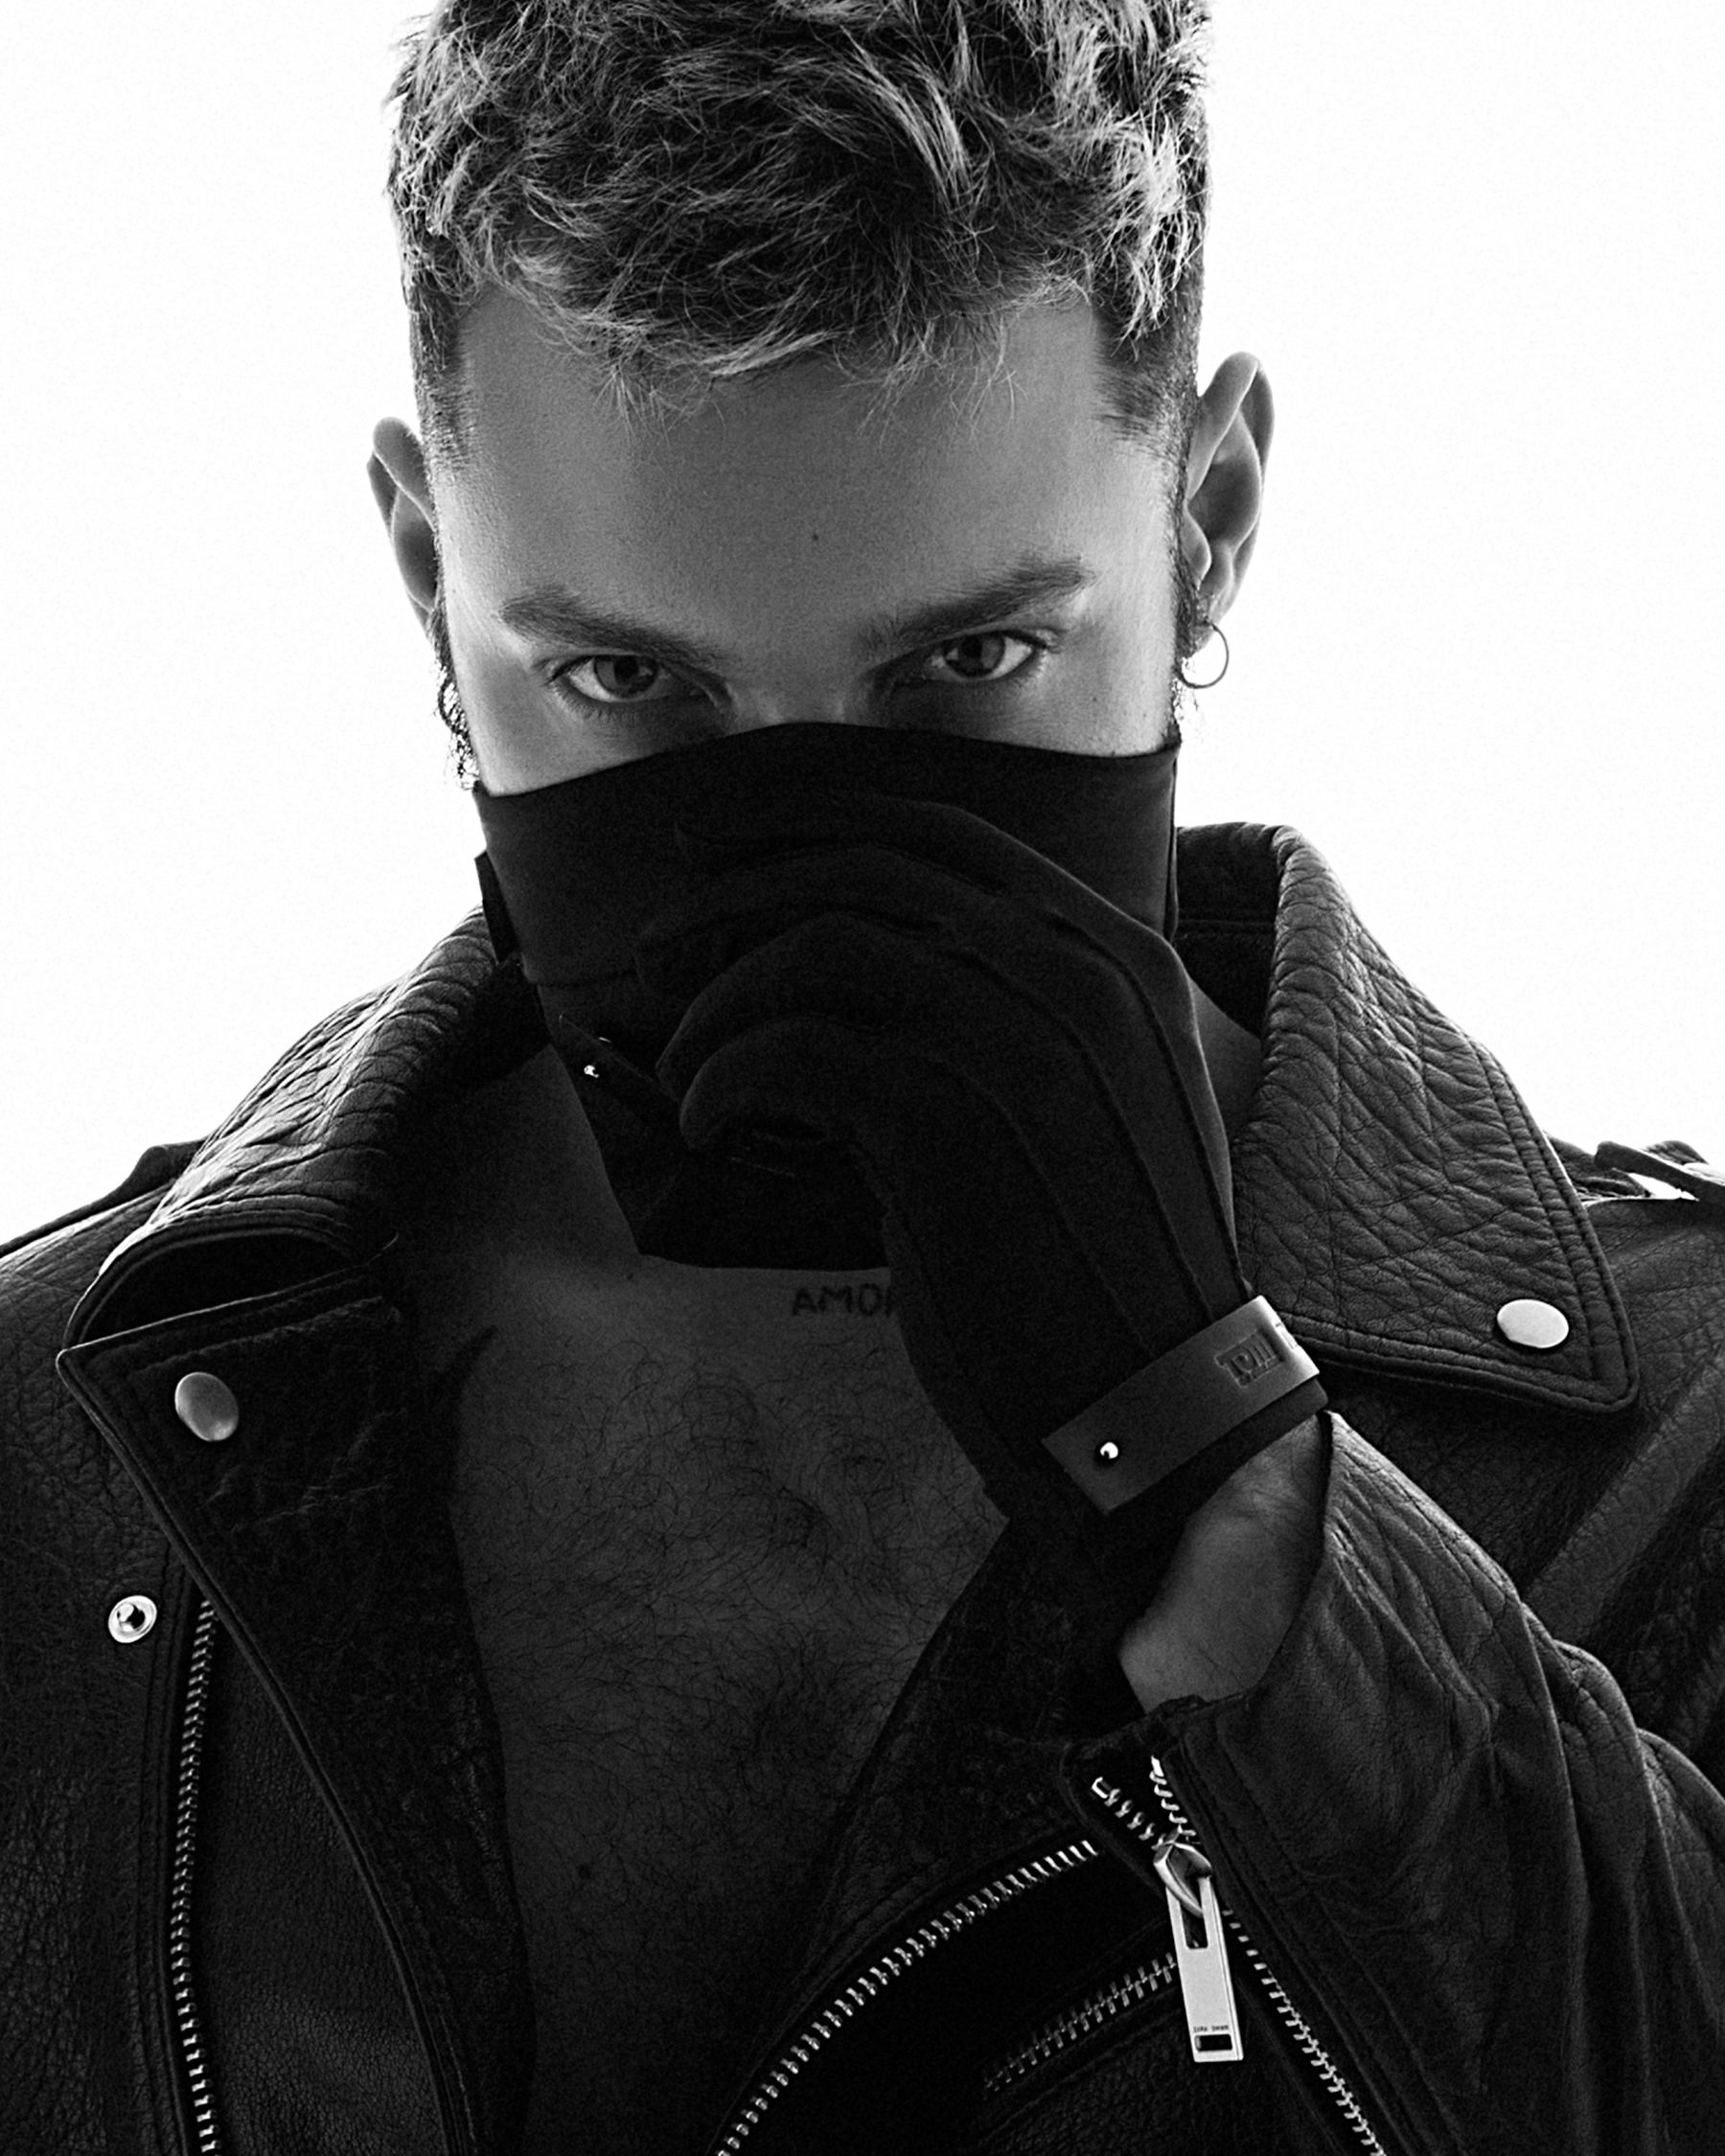 TOM OF FINLAND x FAKBYFAK  Fine Face Covering Mask & Gloves. Exclusive Centennial Edition Kit. Black Code: FBF-41103-01